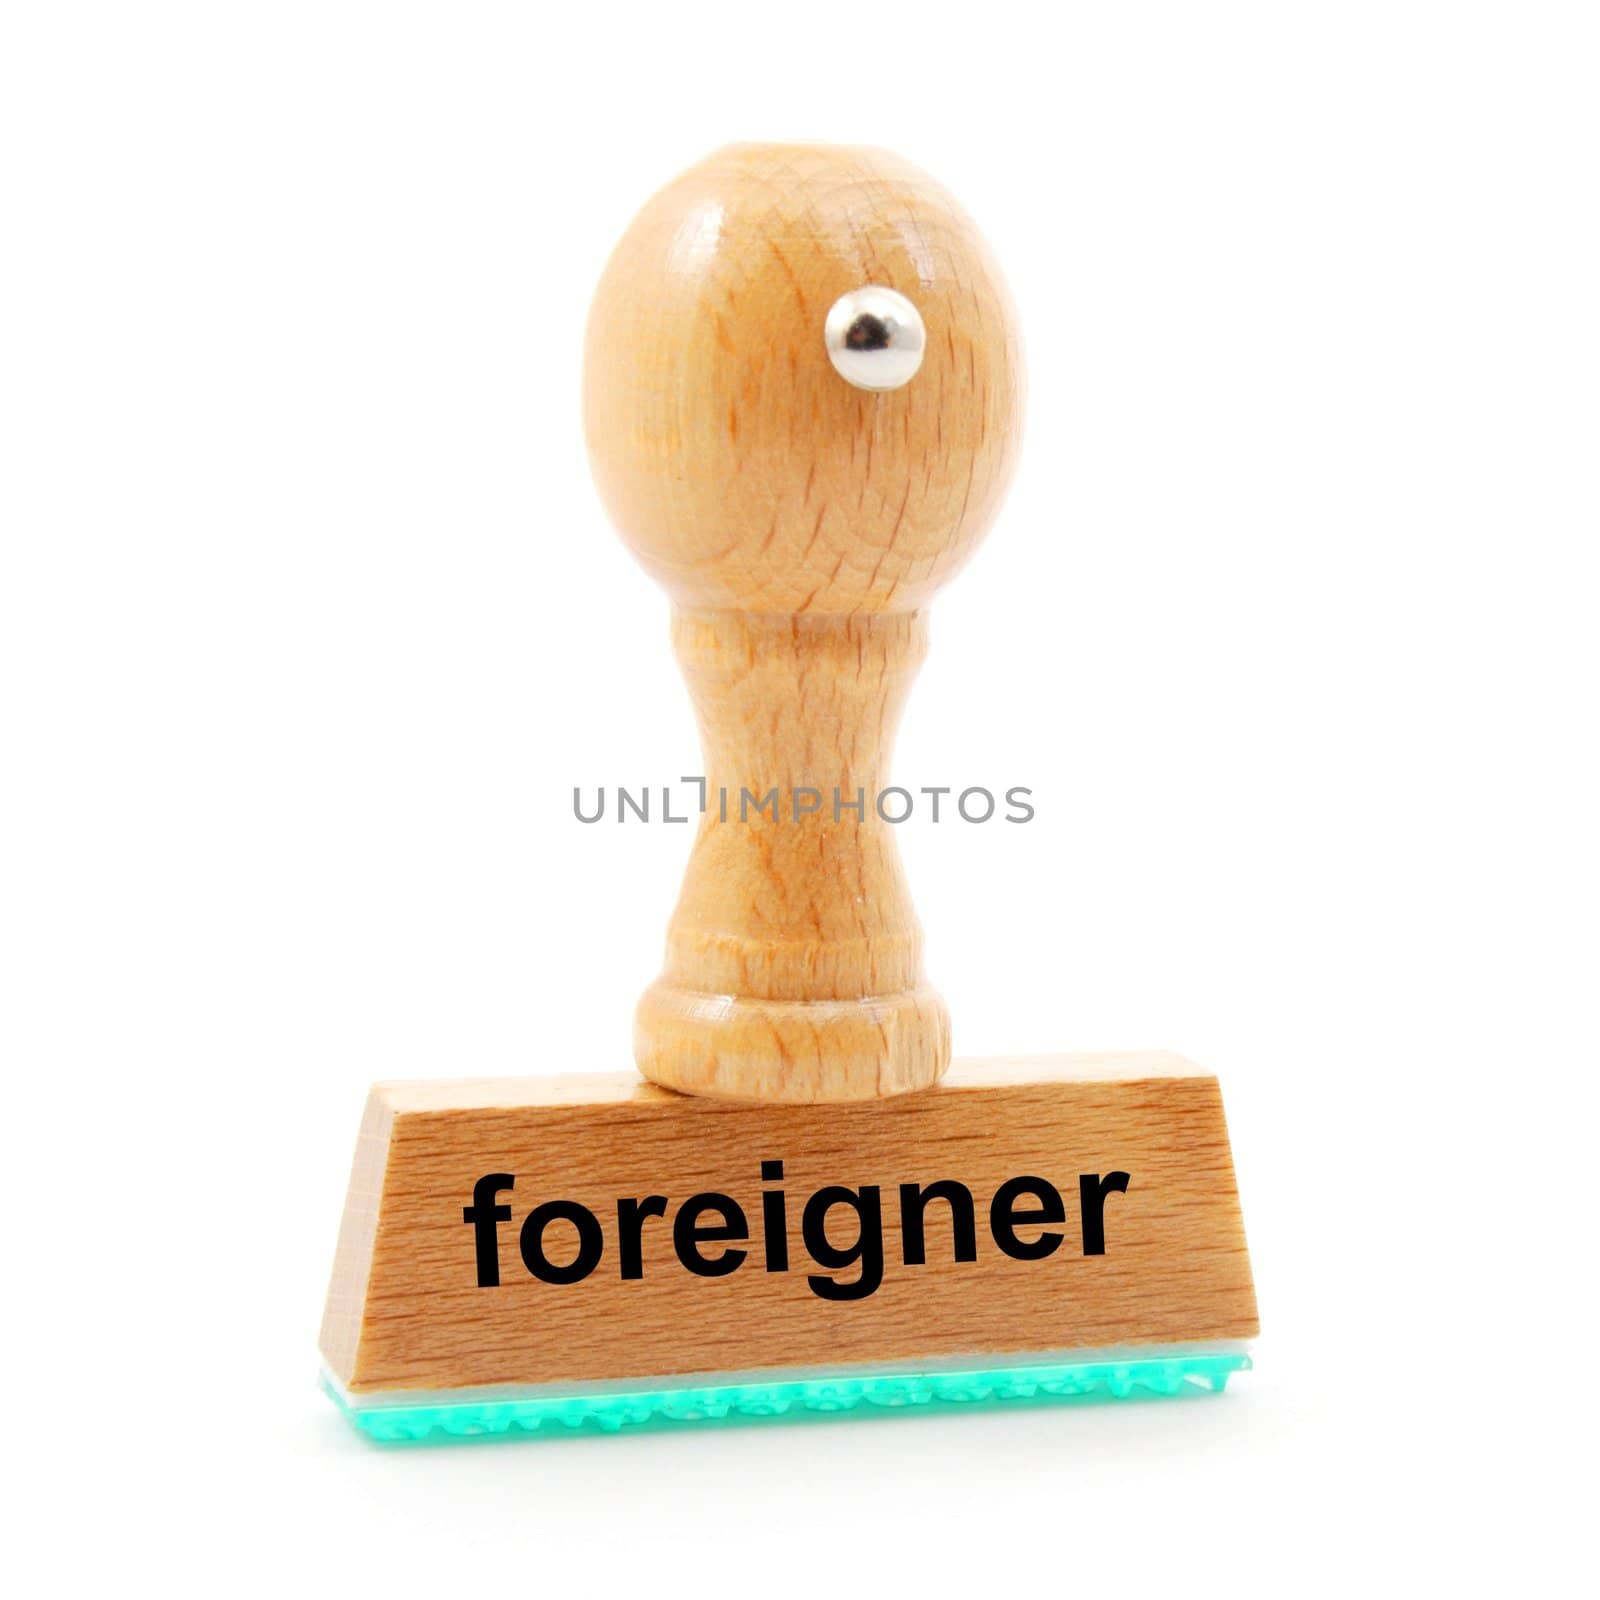 foreigner stamp showing minority concept with copyspace